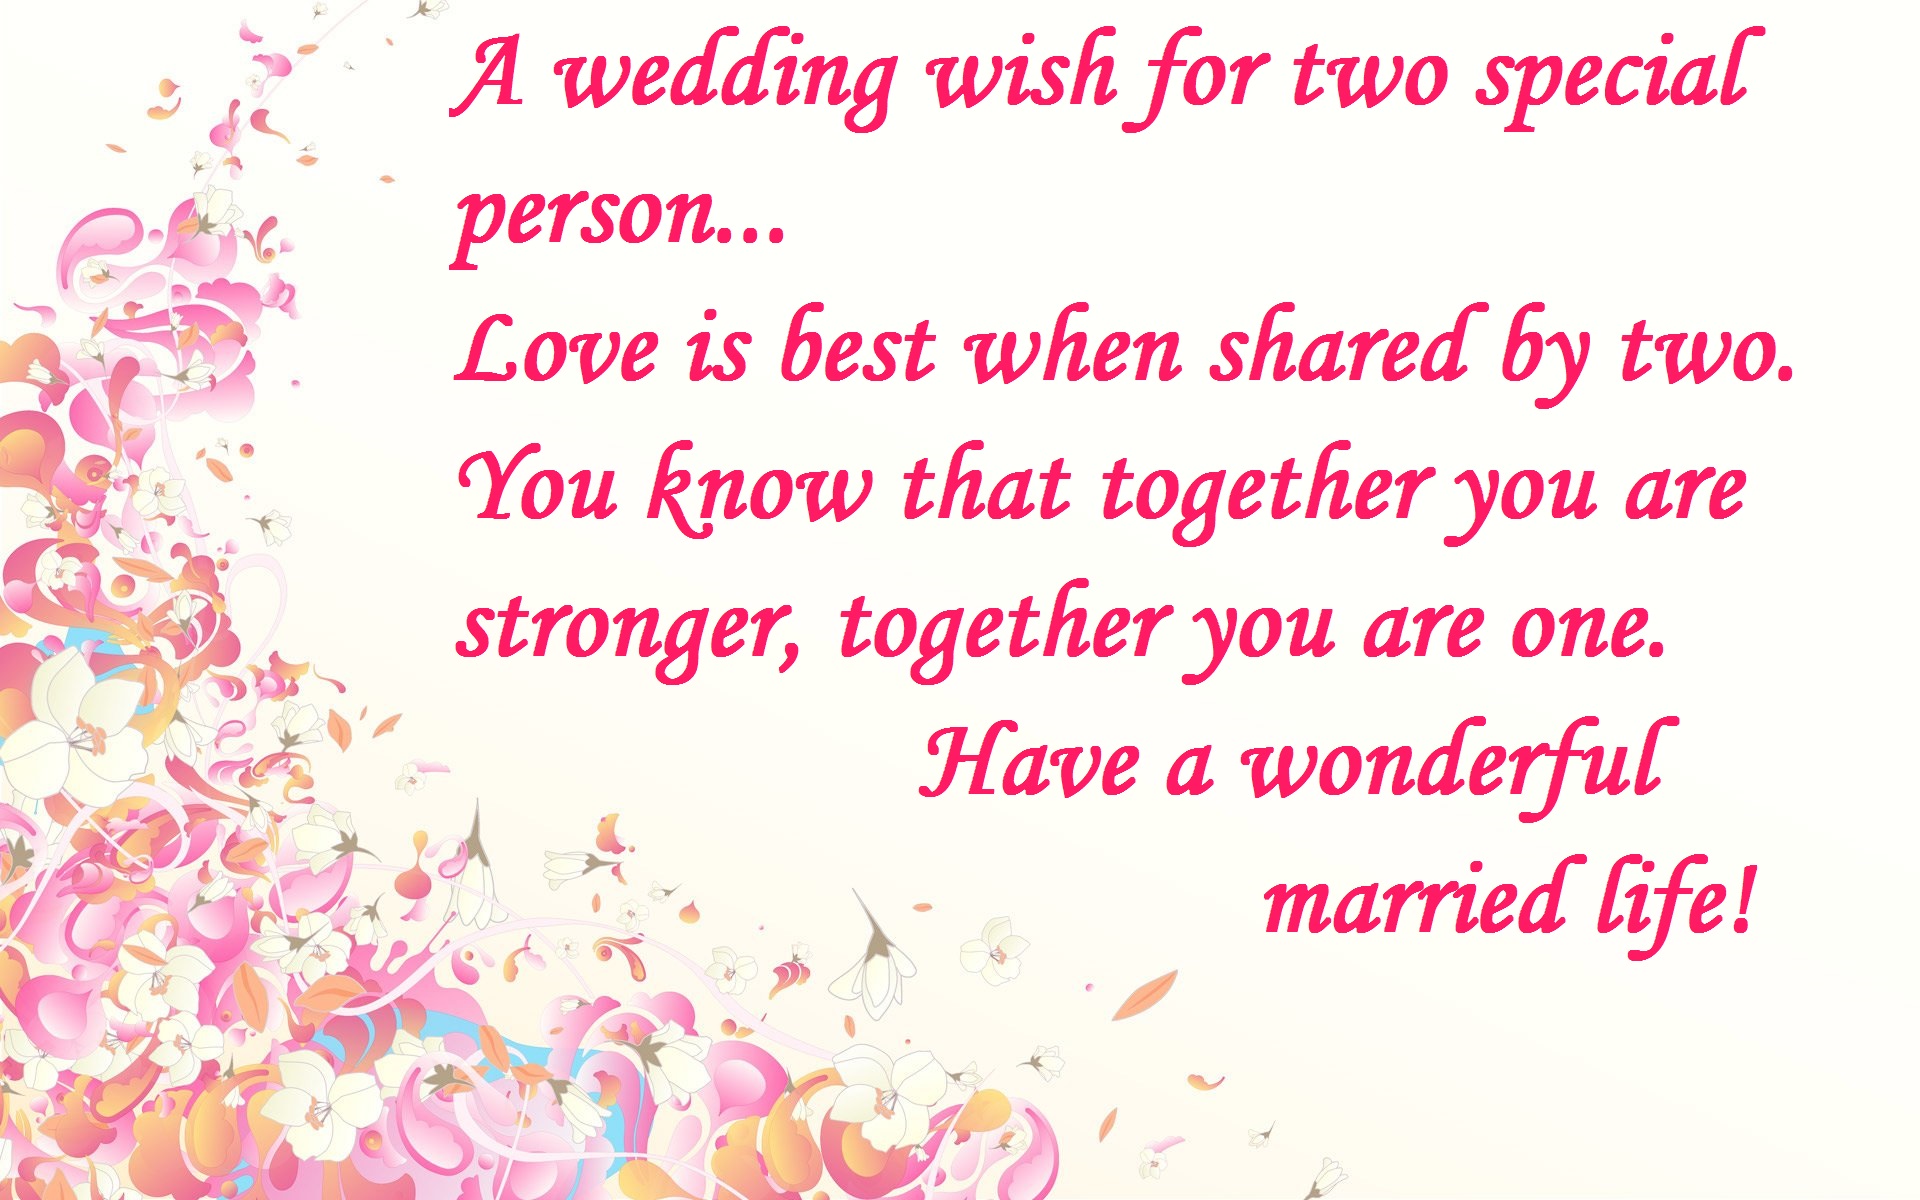 wishes for wedding